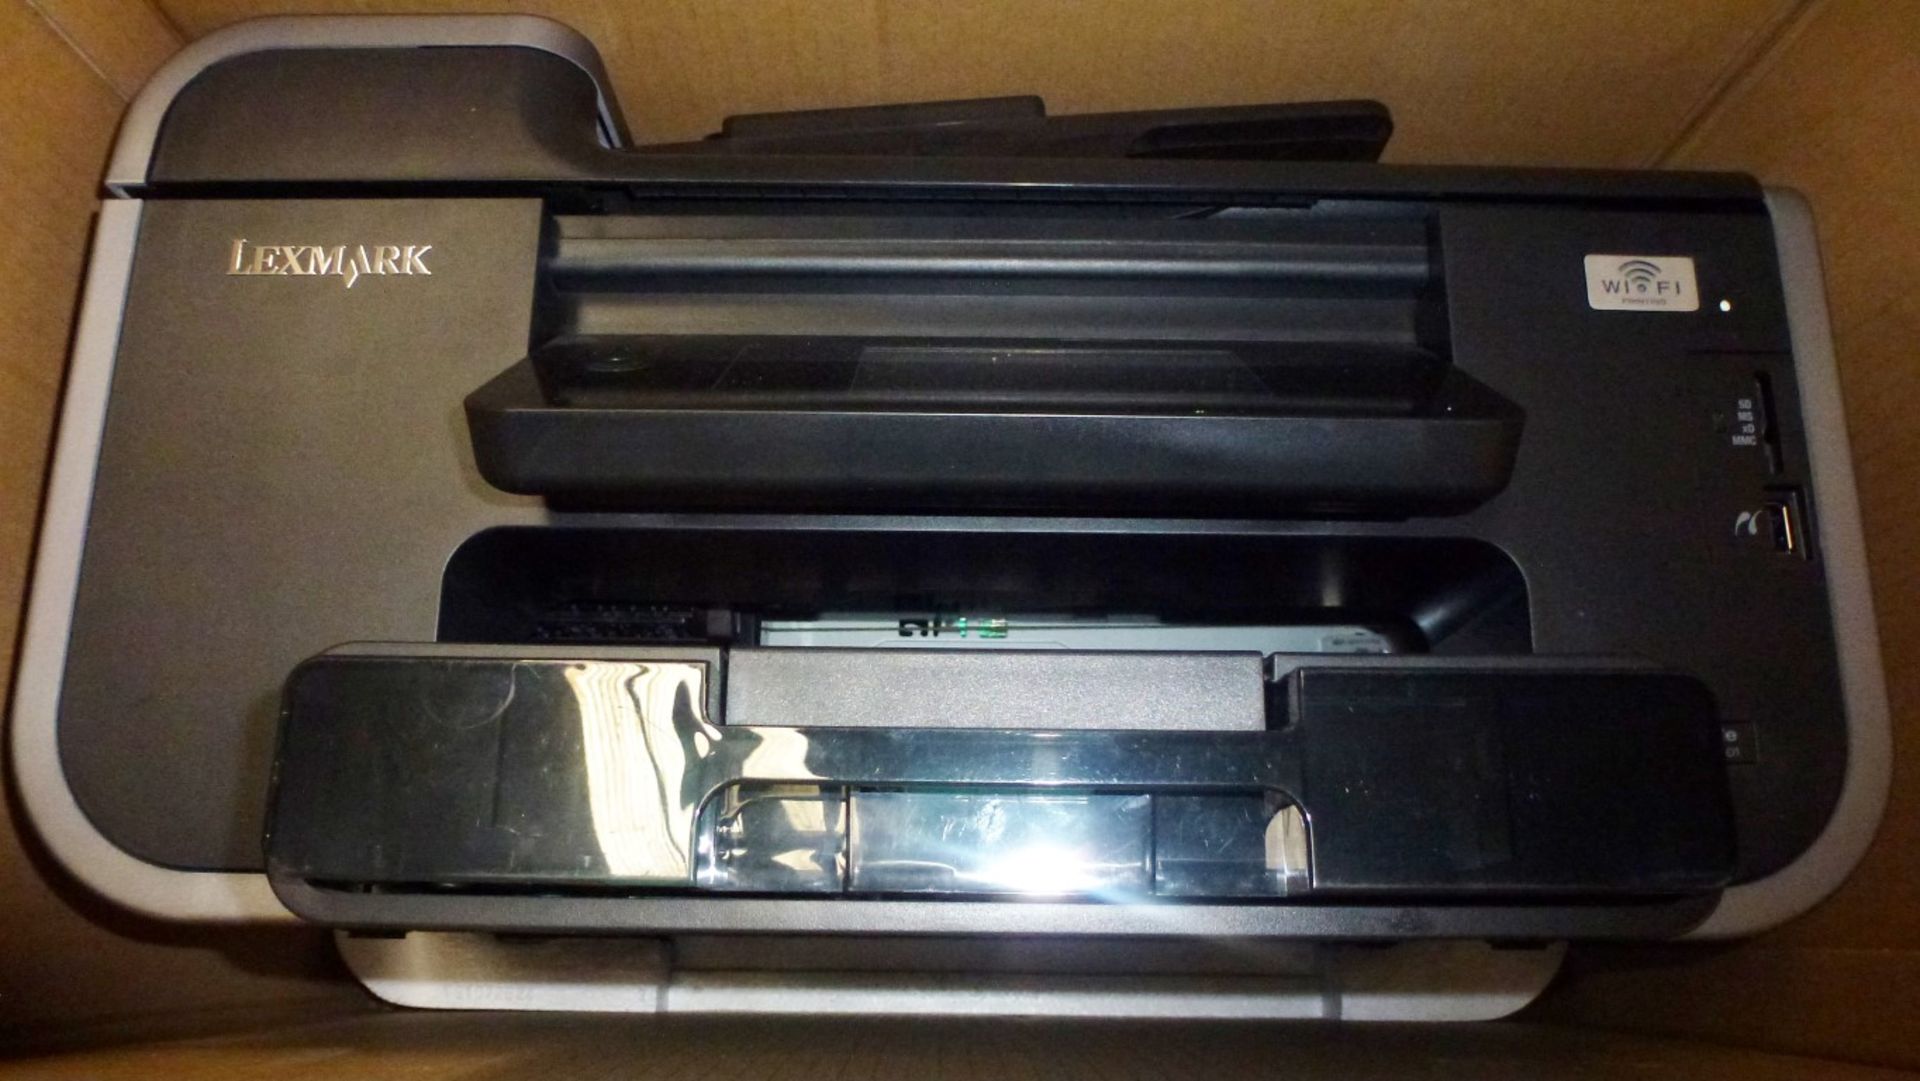 8 x Various Printers - Models Include Epson Stylus SX535WD, HP Deskjet 3070A, HP Photosmart 5510, - Image 10 of 18